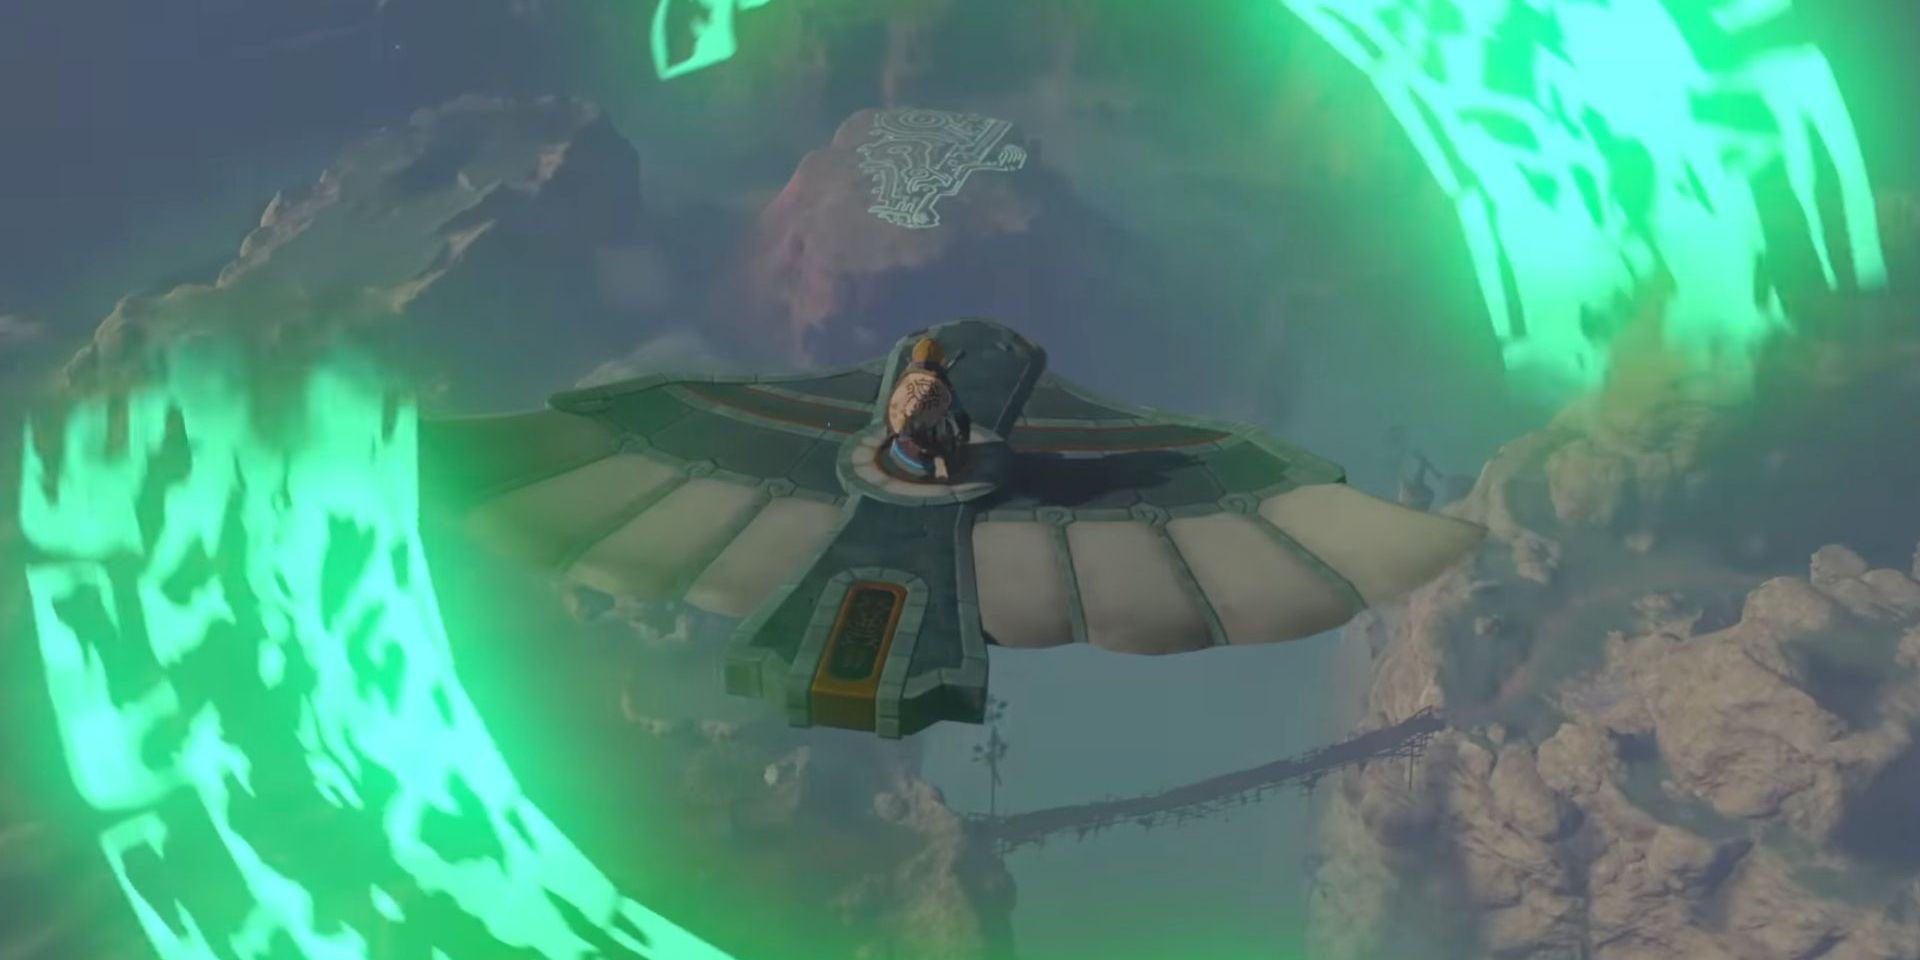 Stills from the Tears of Kingdoms Link trailer riding a bird-like vehicle surrounded by green swirls